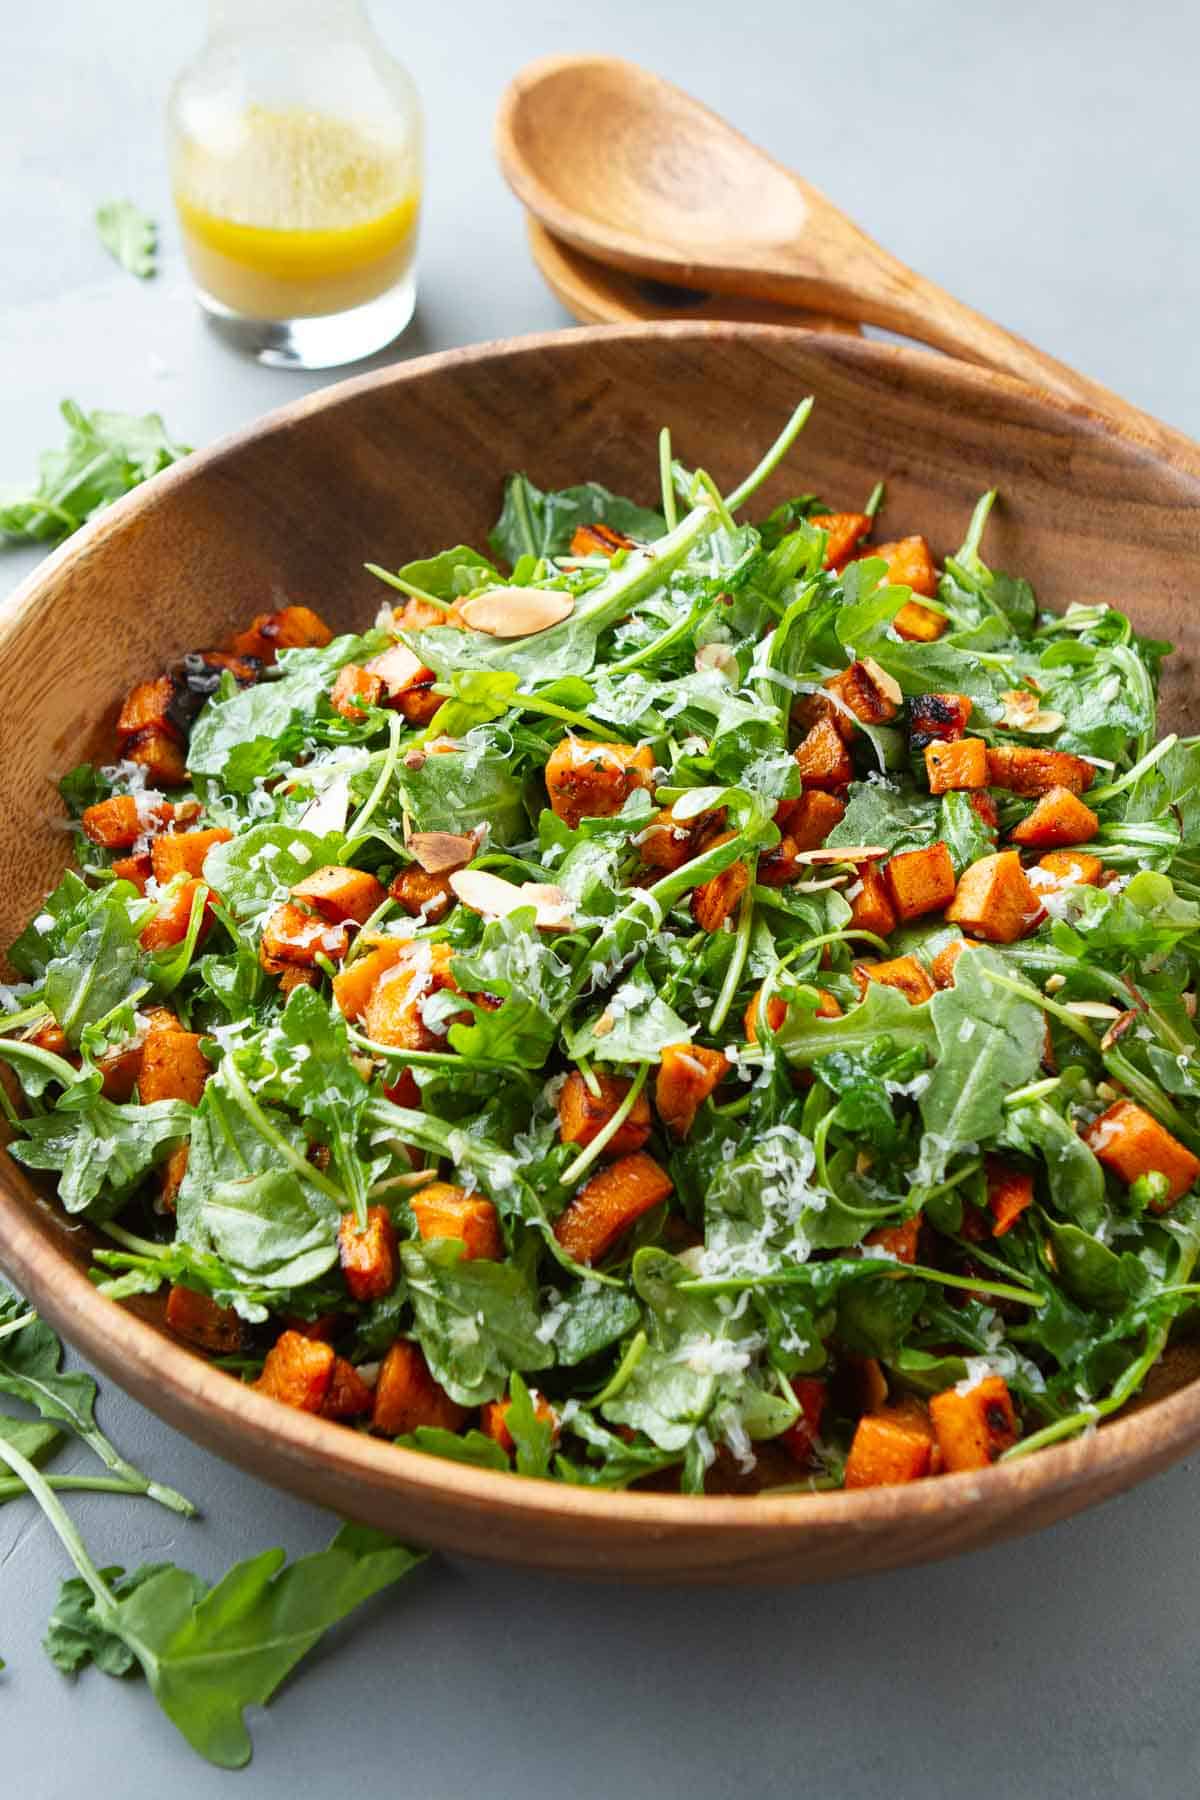 Arugula salad with sweet potato in a large wooden salad bowl.